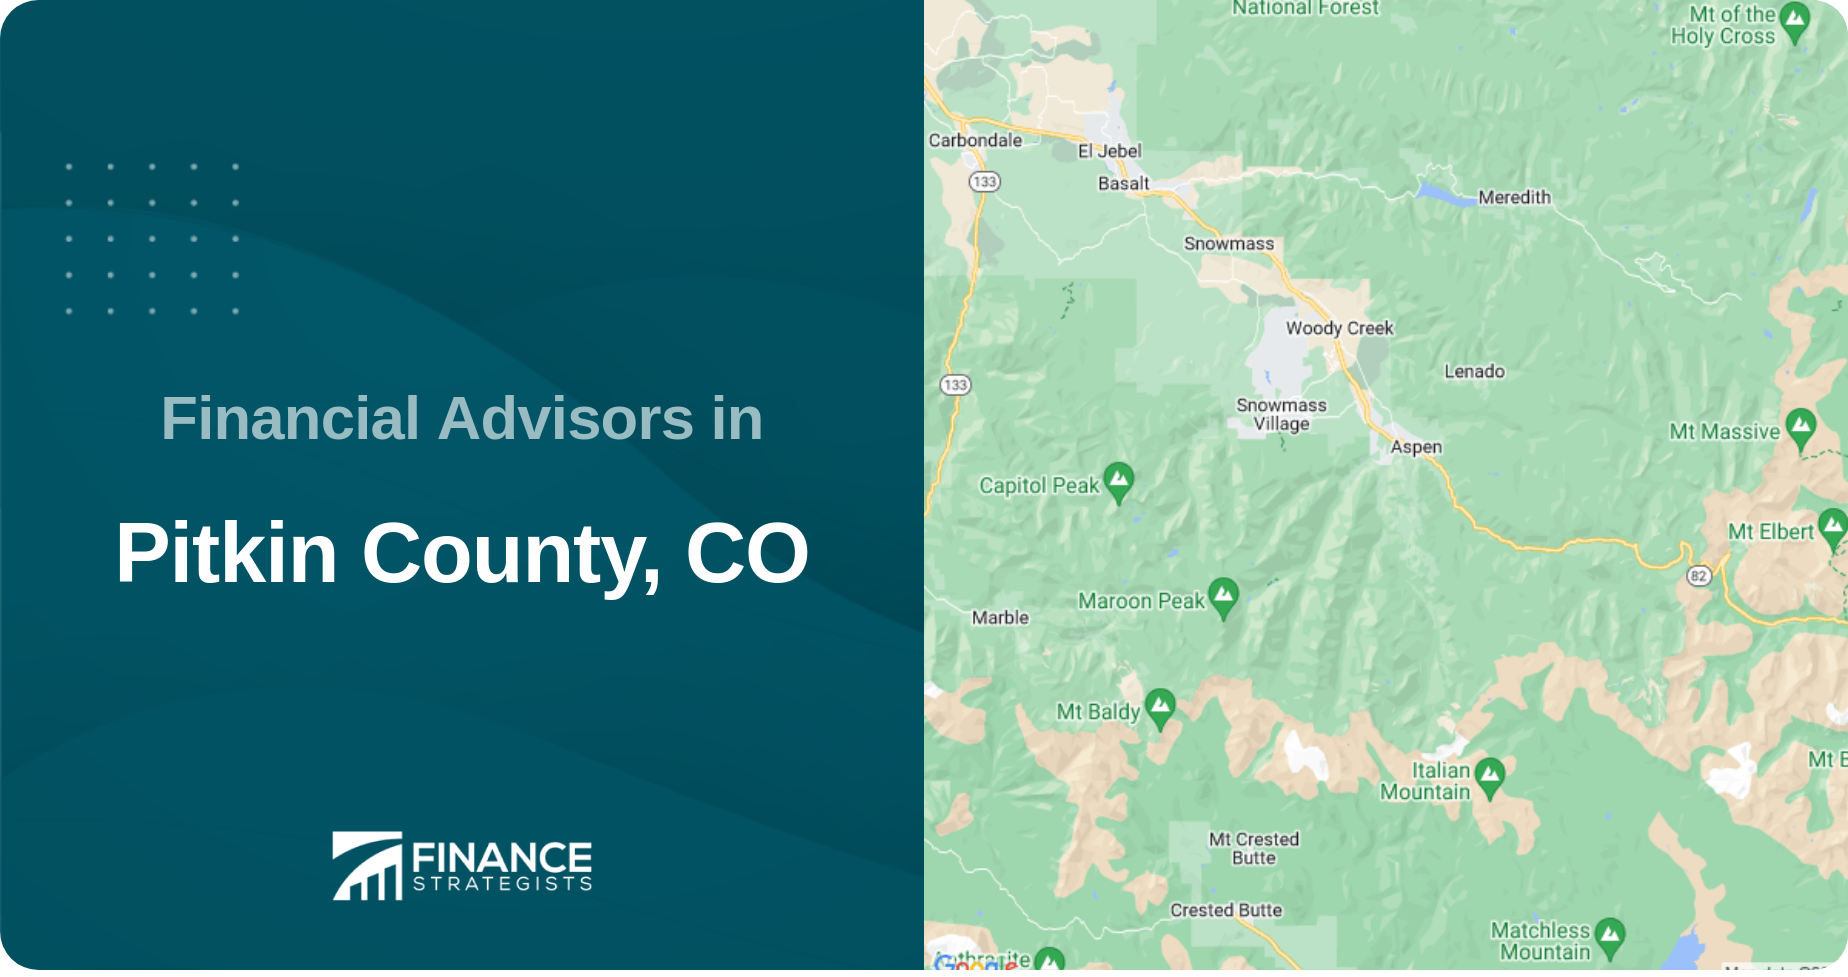 Financial Advisors in Pitkin County, CO